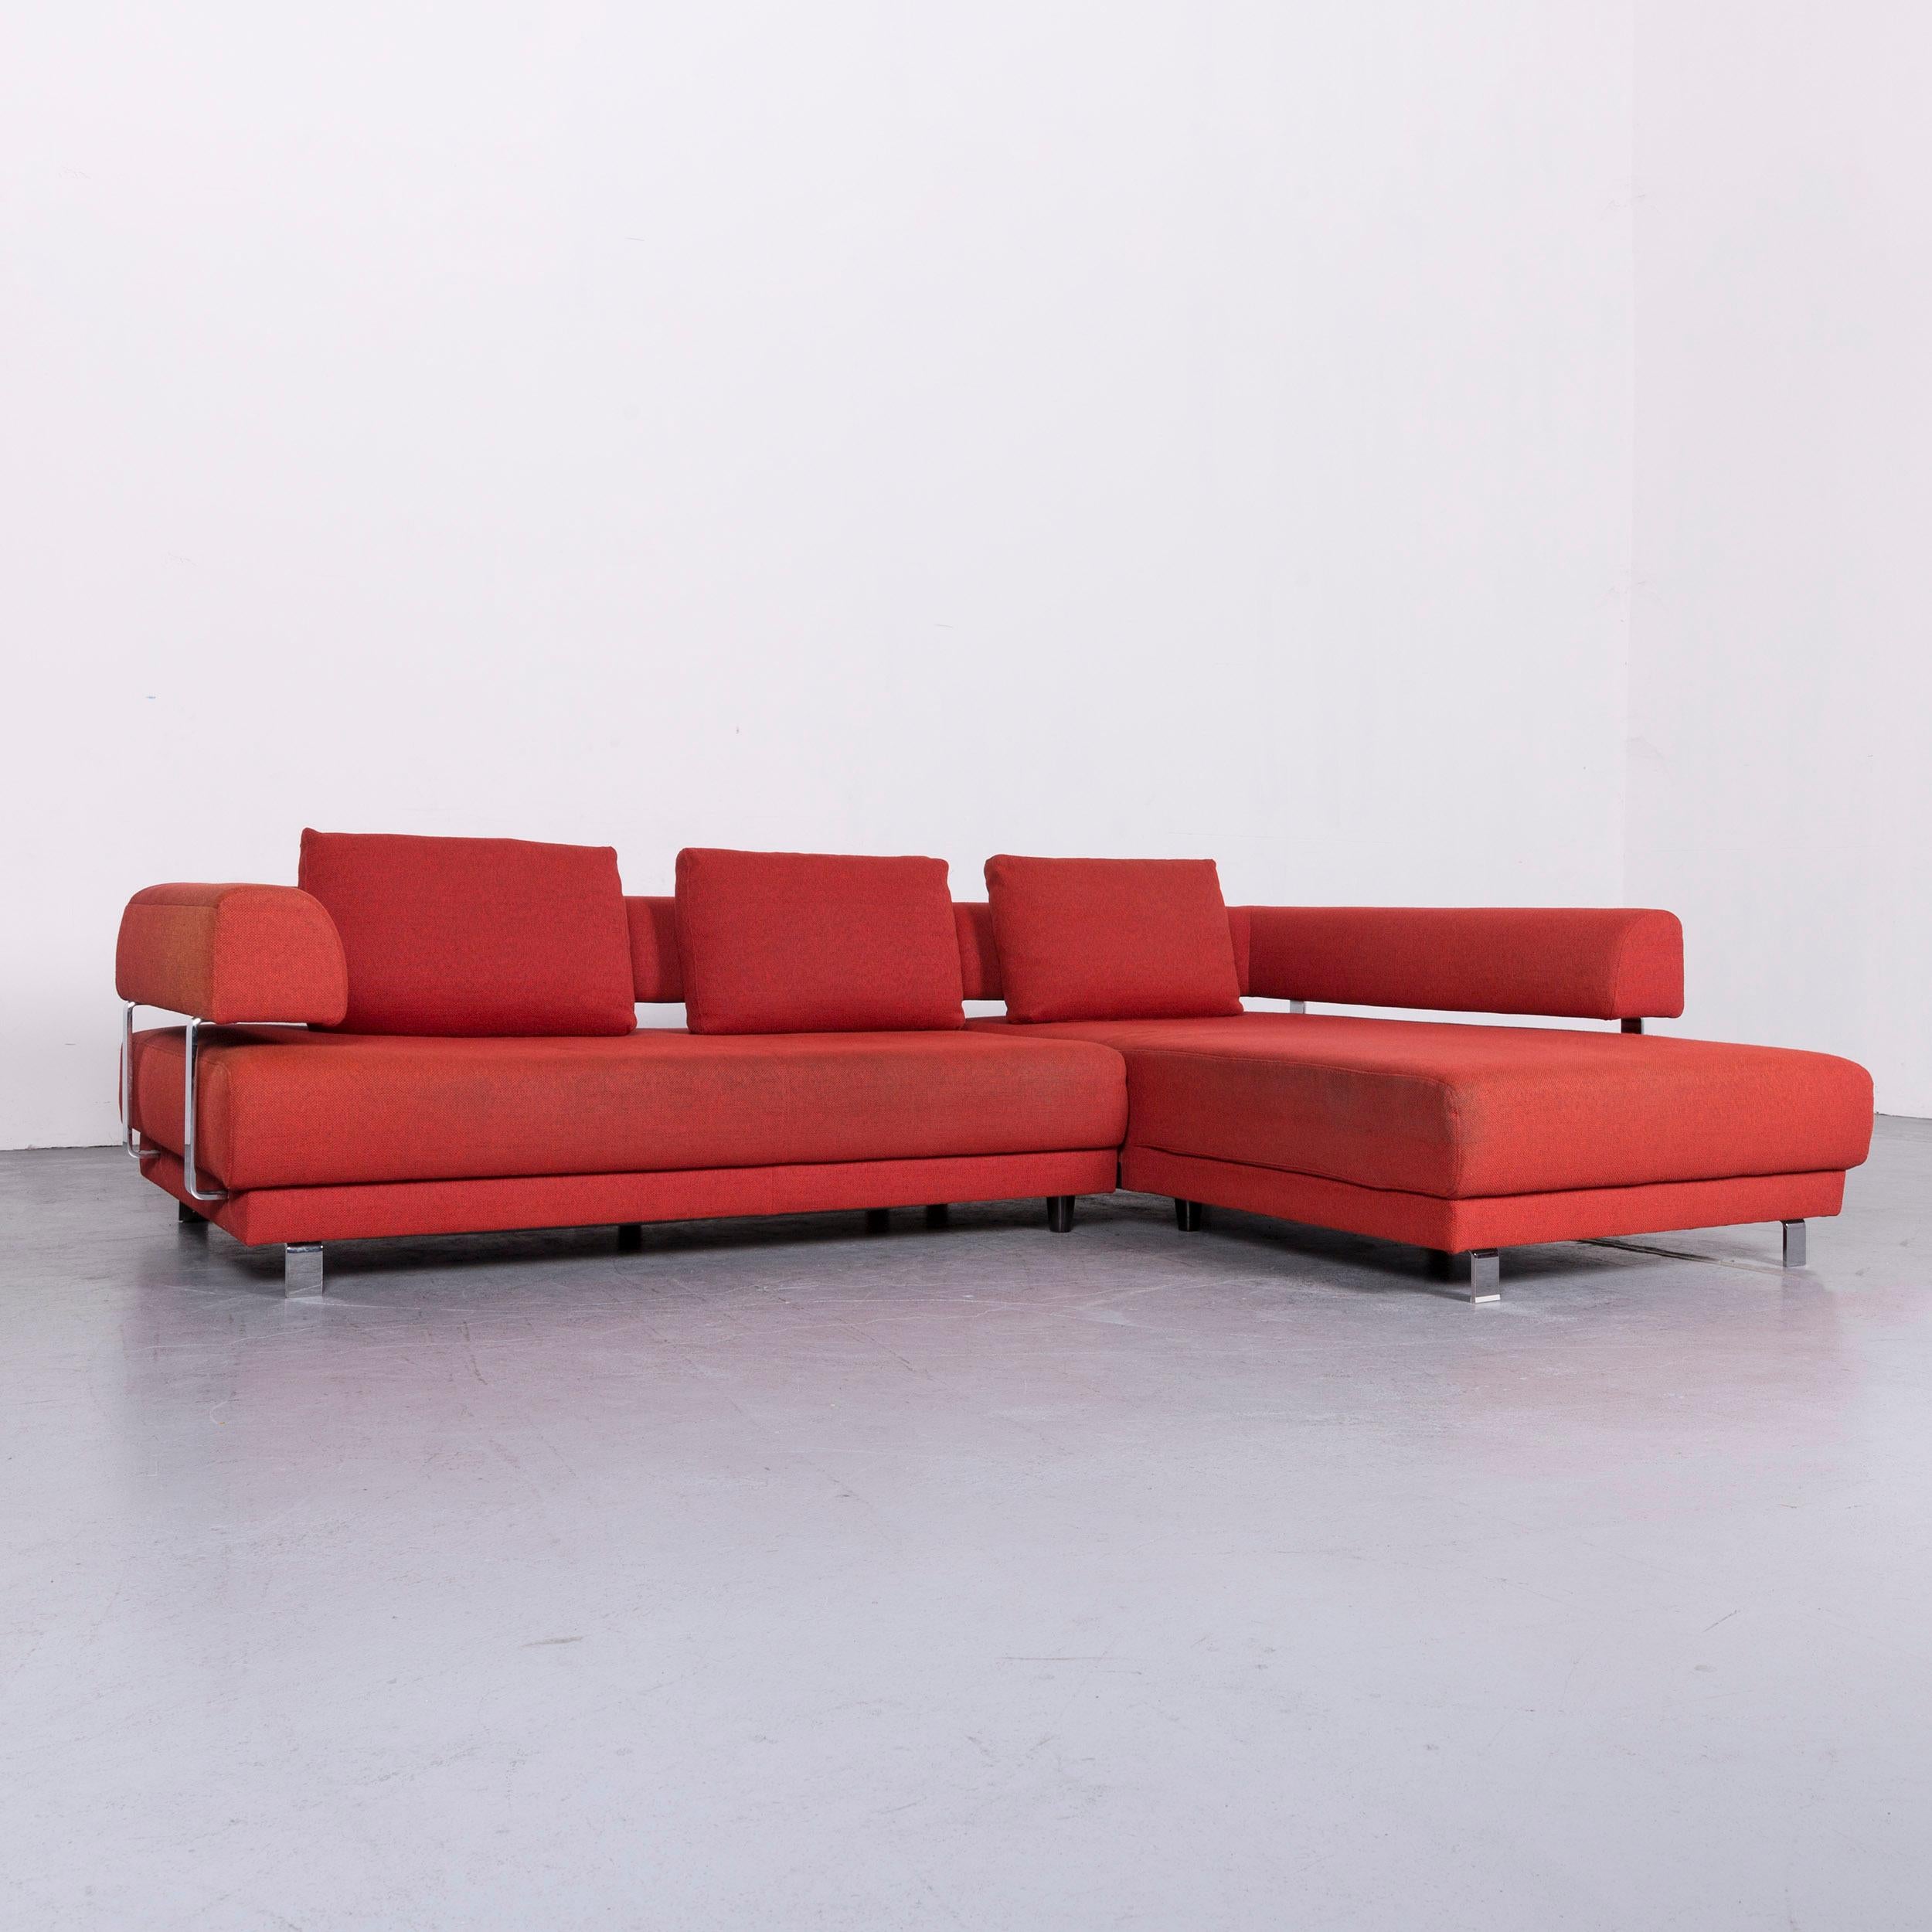 We bring to you a Ewald Schillig brand face designer sofa footstool set fabric red corner couch.